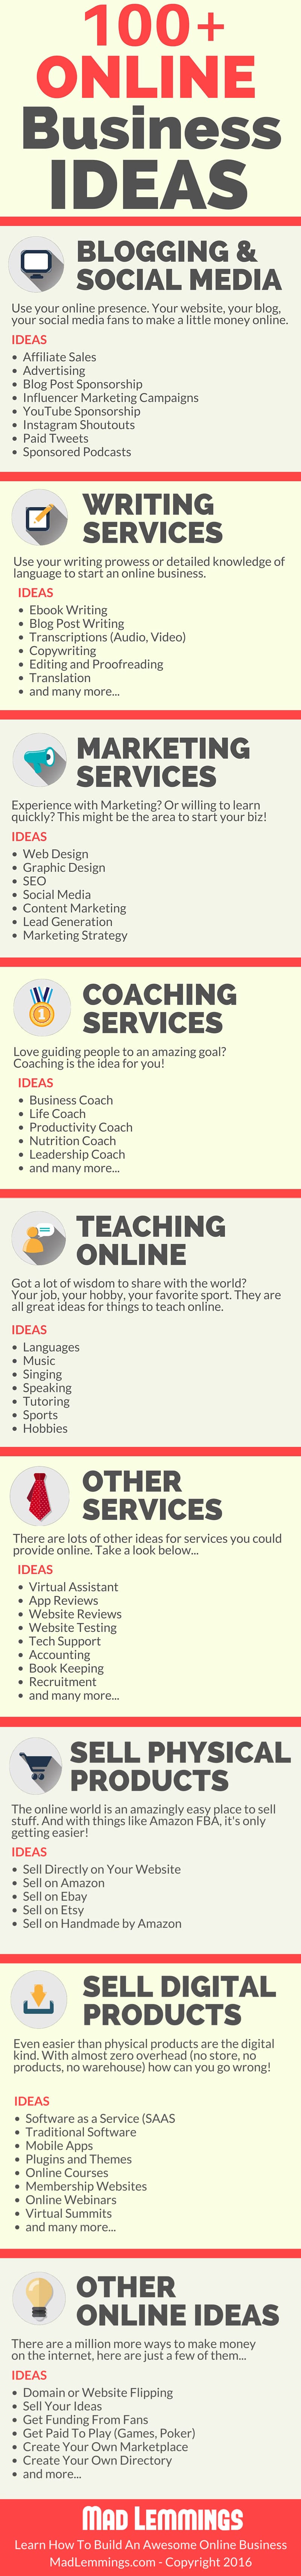 100 Online Business Ideas Infographic